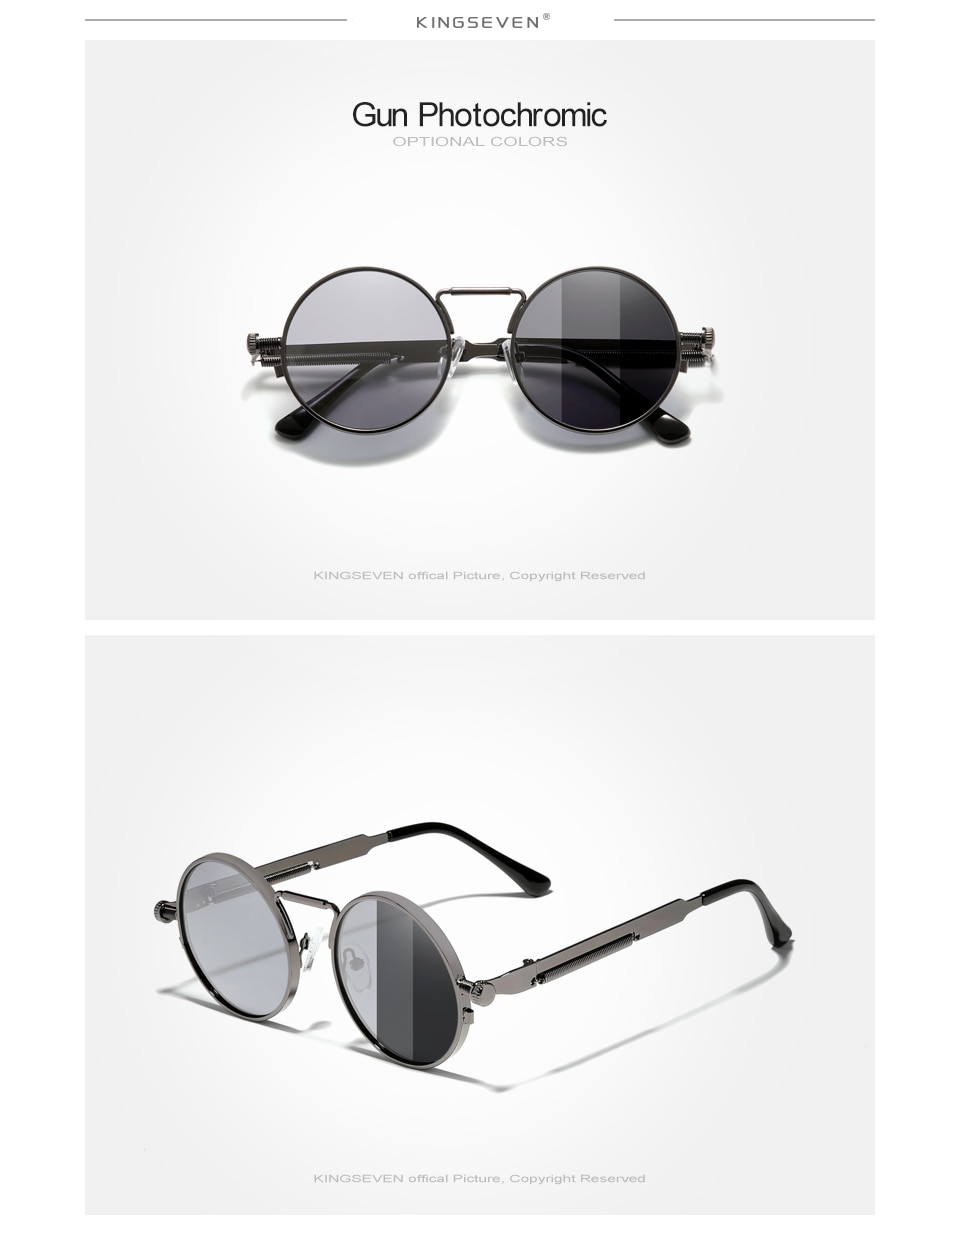 KINGSEVEN High Quality Gothic Steampunk Round Metal Frame Sunglasses